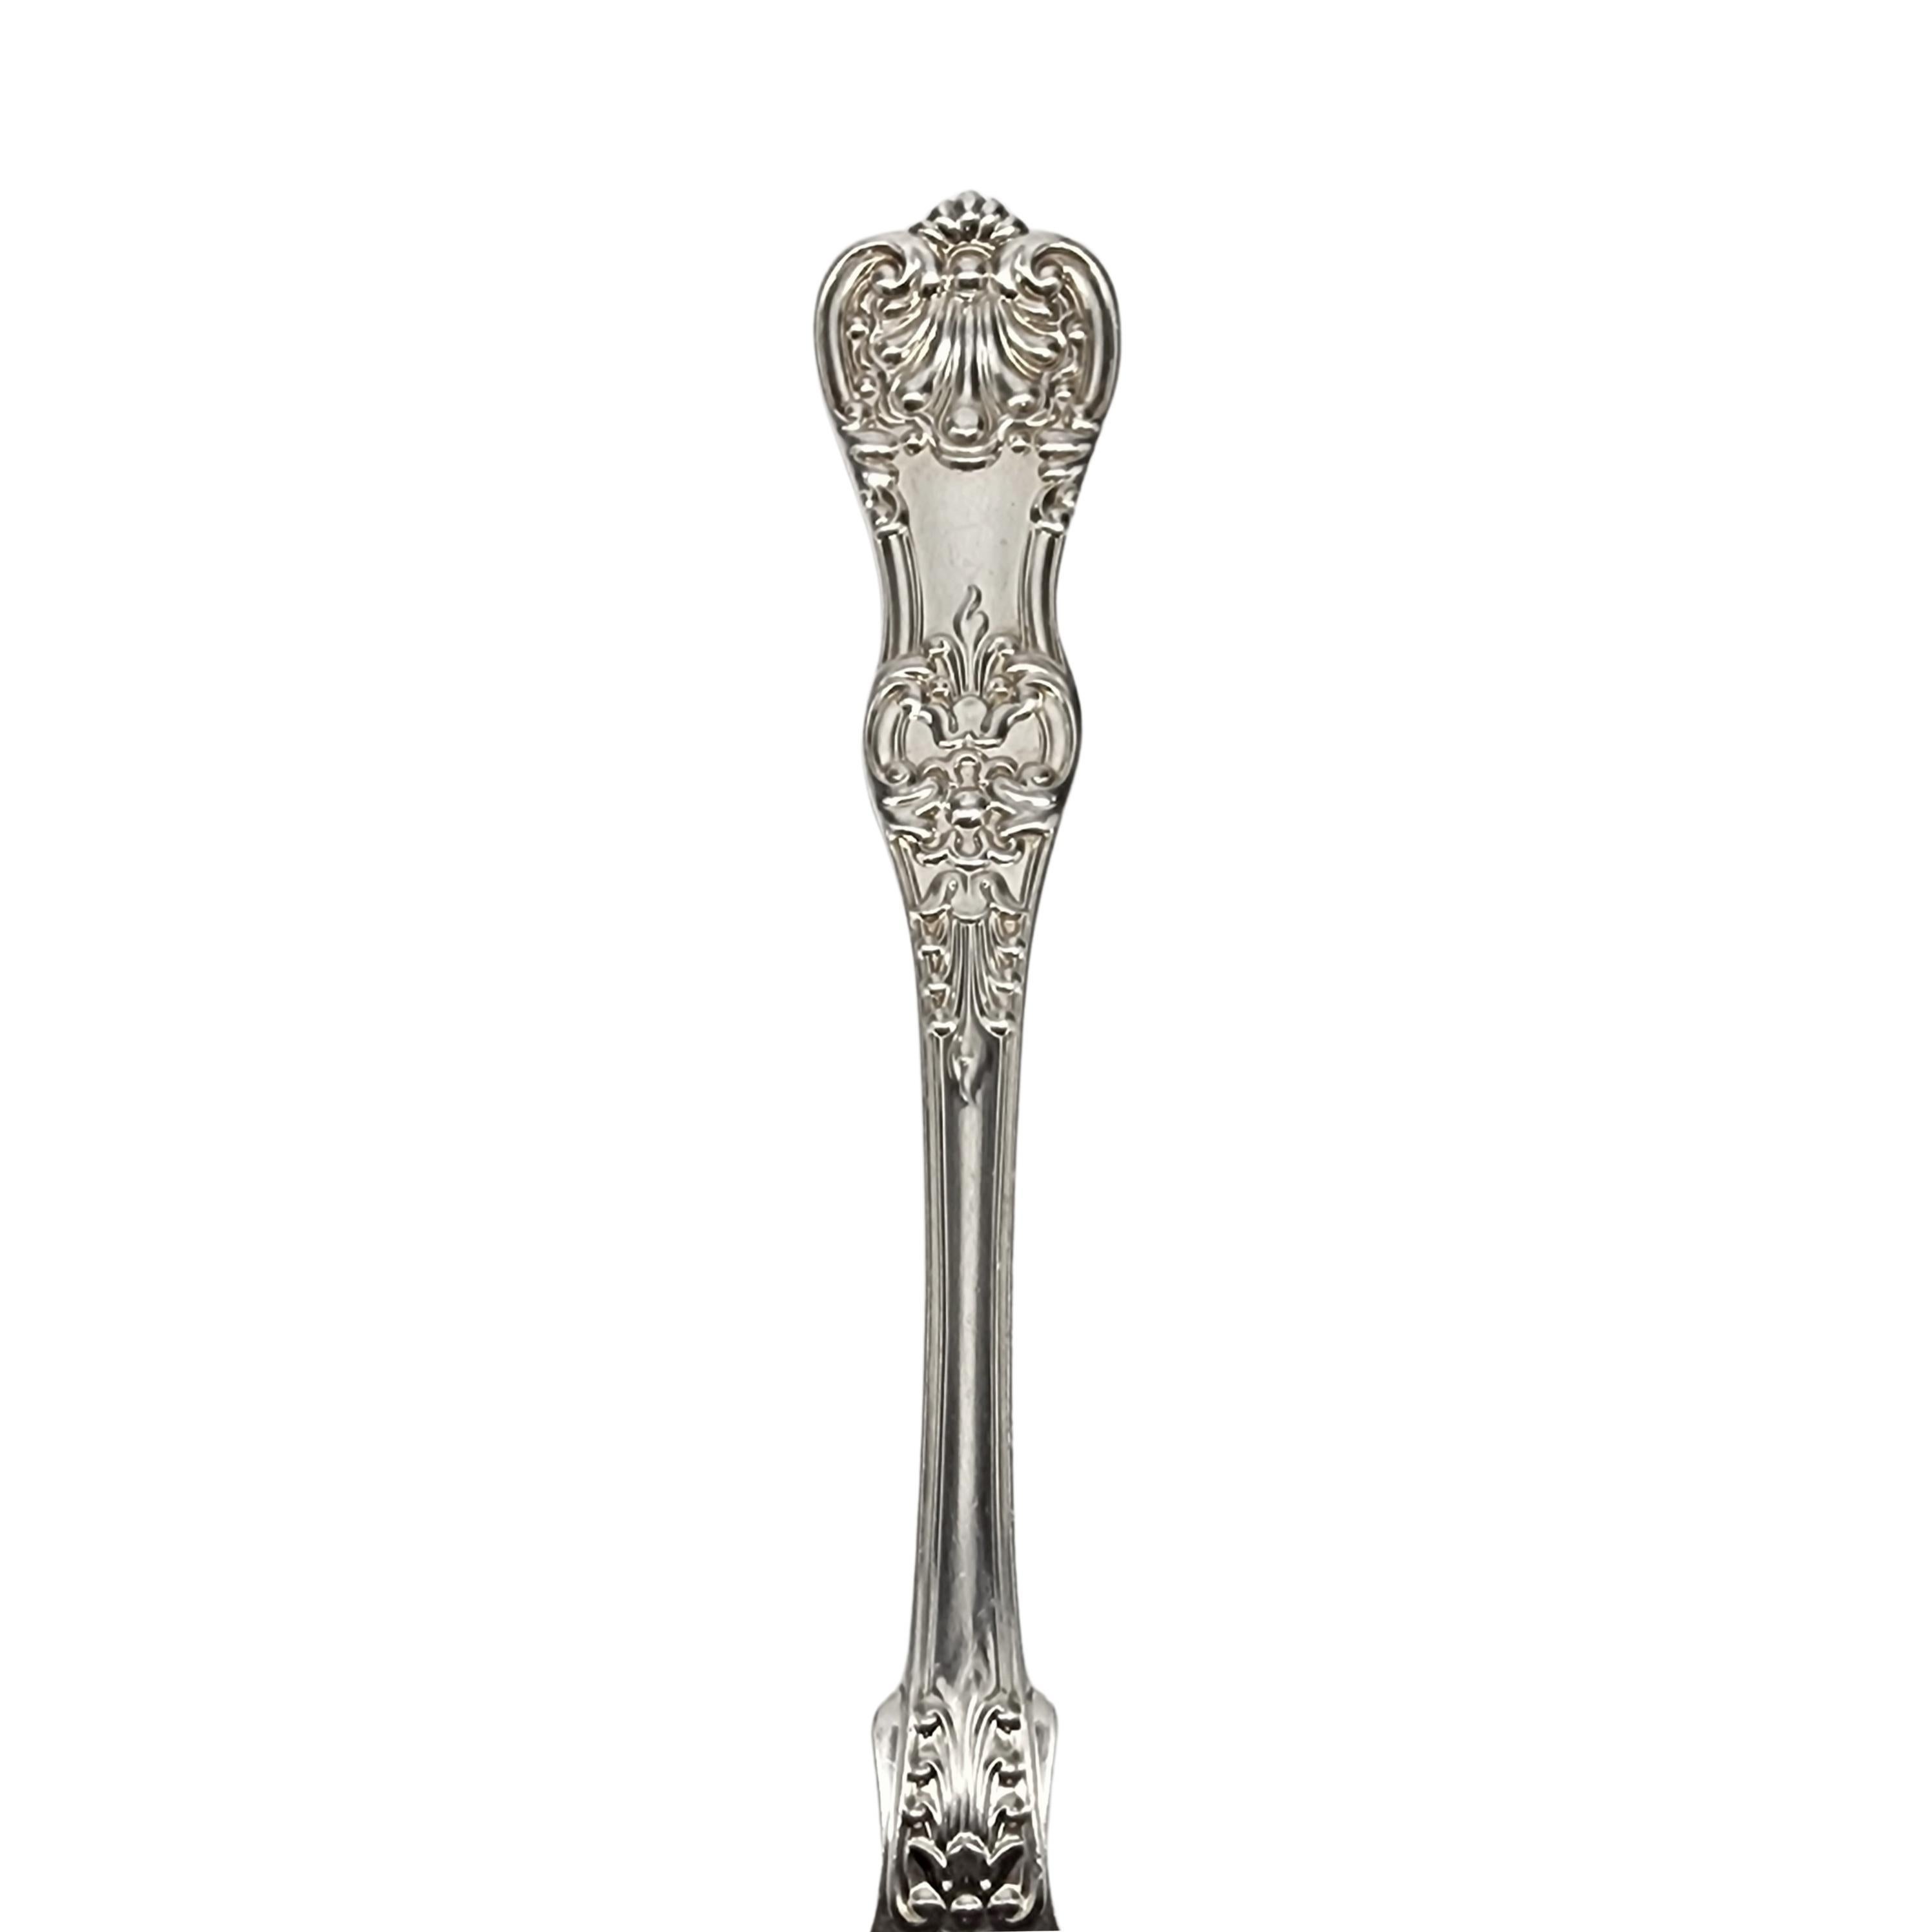 Tiffany & Co English King Sterling Silver Serving Tablespoon 8 1/2